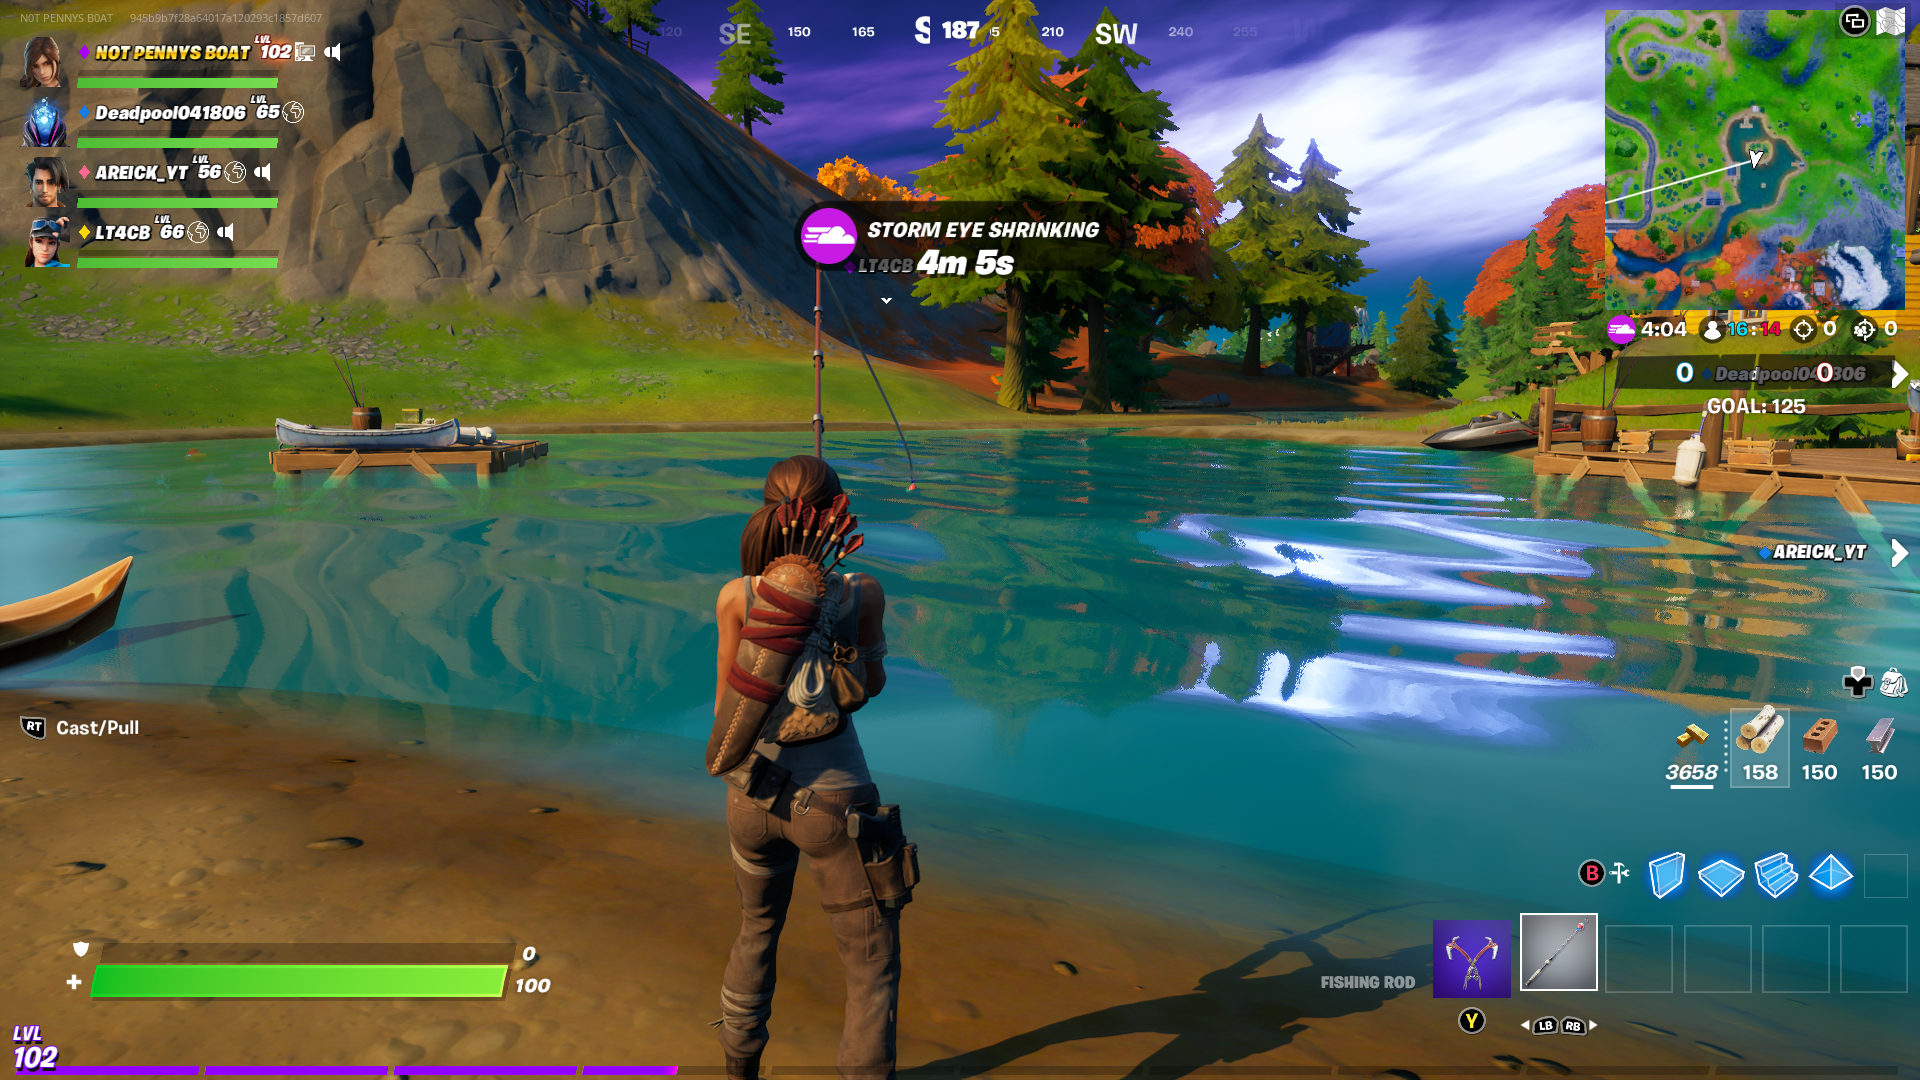 Fortnite's New Wild Weeks Event Is Fish Fiesta, Giving a Buff To